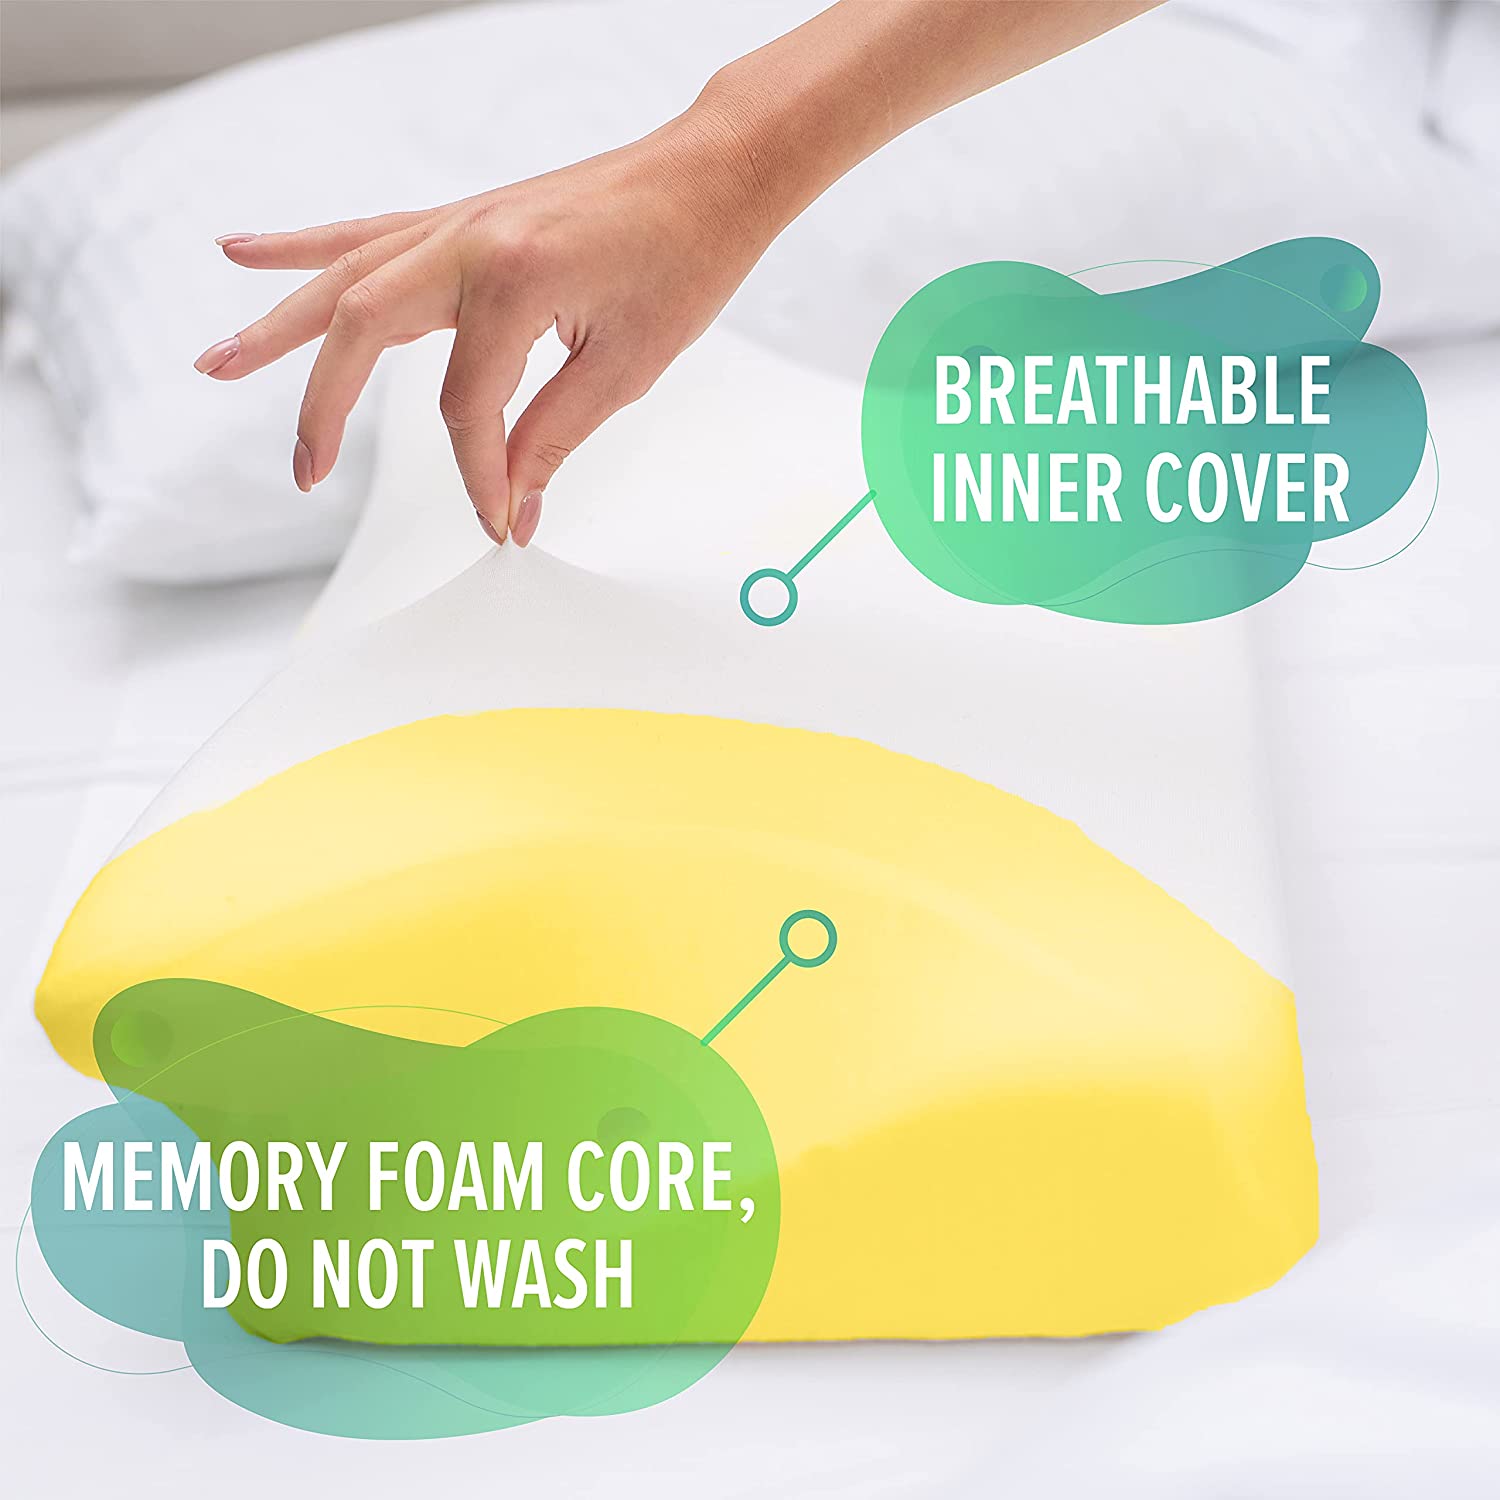 Cervical Memory Foam Carbon SnoreX Pillow, Standard Size Pillow with Breathable Cover, Anti-Snoring Orthopedic Pillow